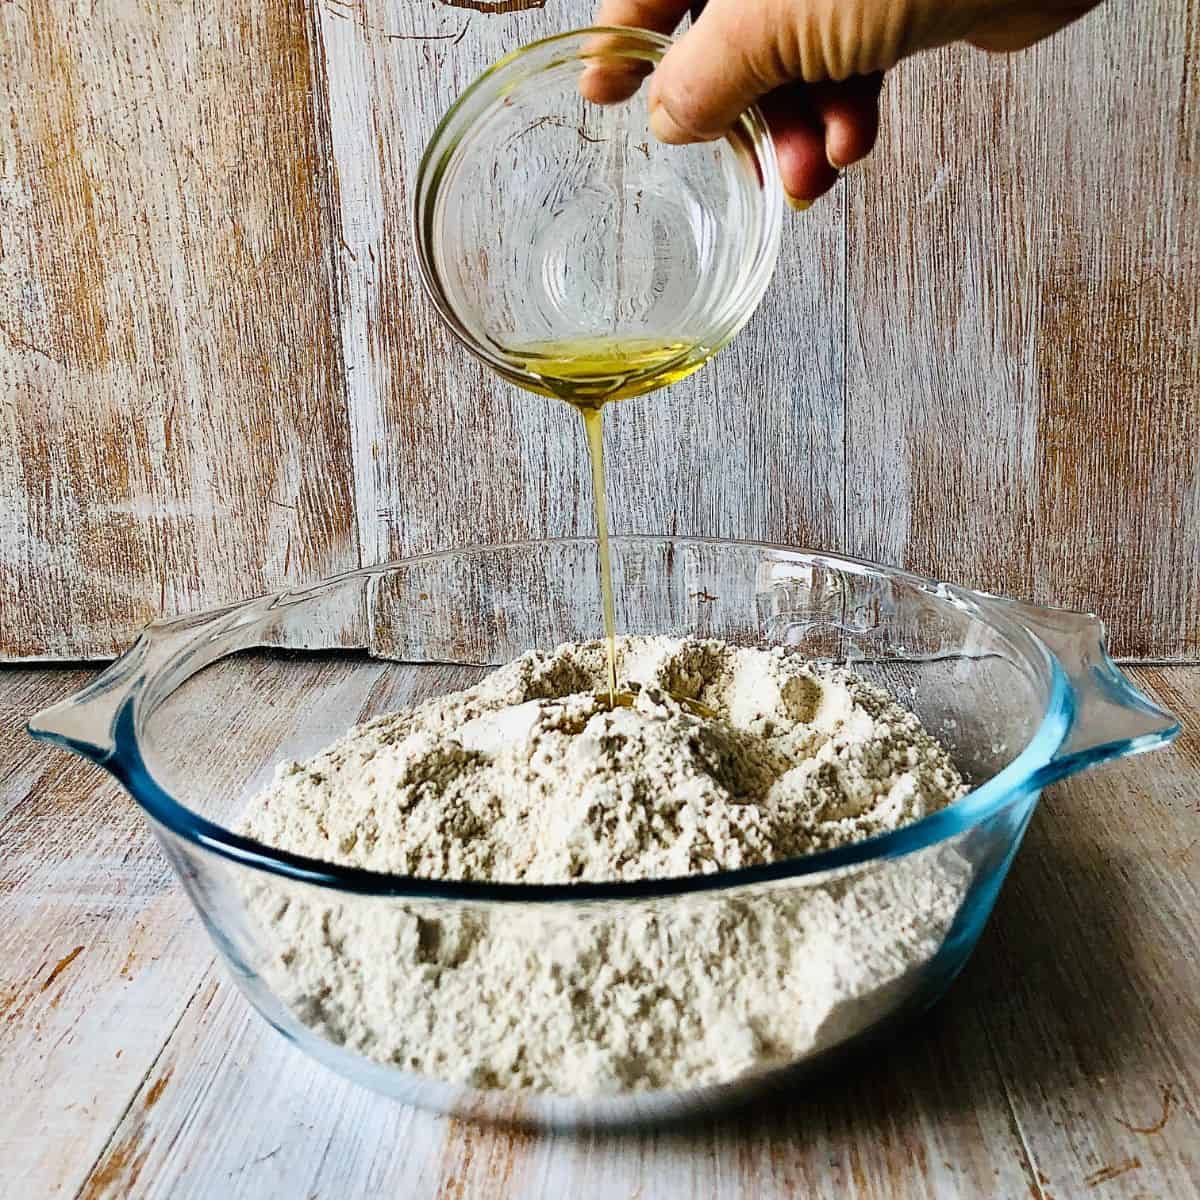 A glass bowl containing chapati flour, with olive oil being poured into the flour from a small glass dish.